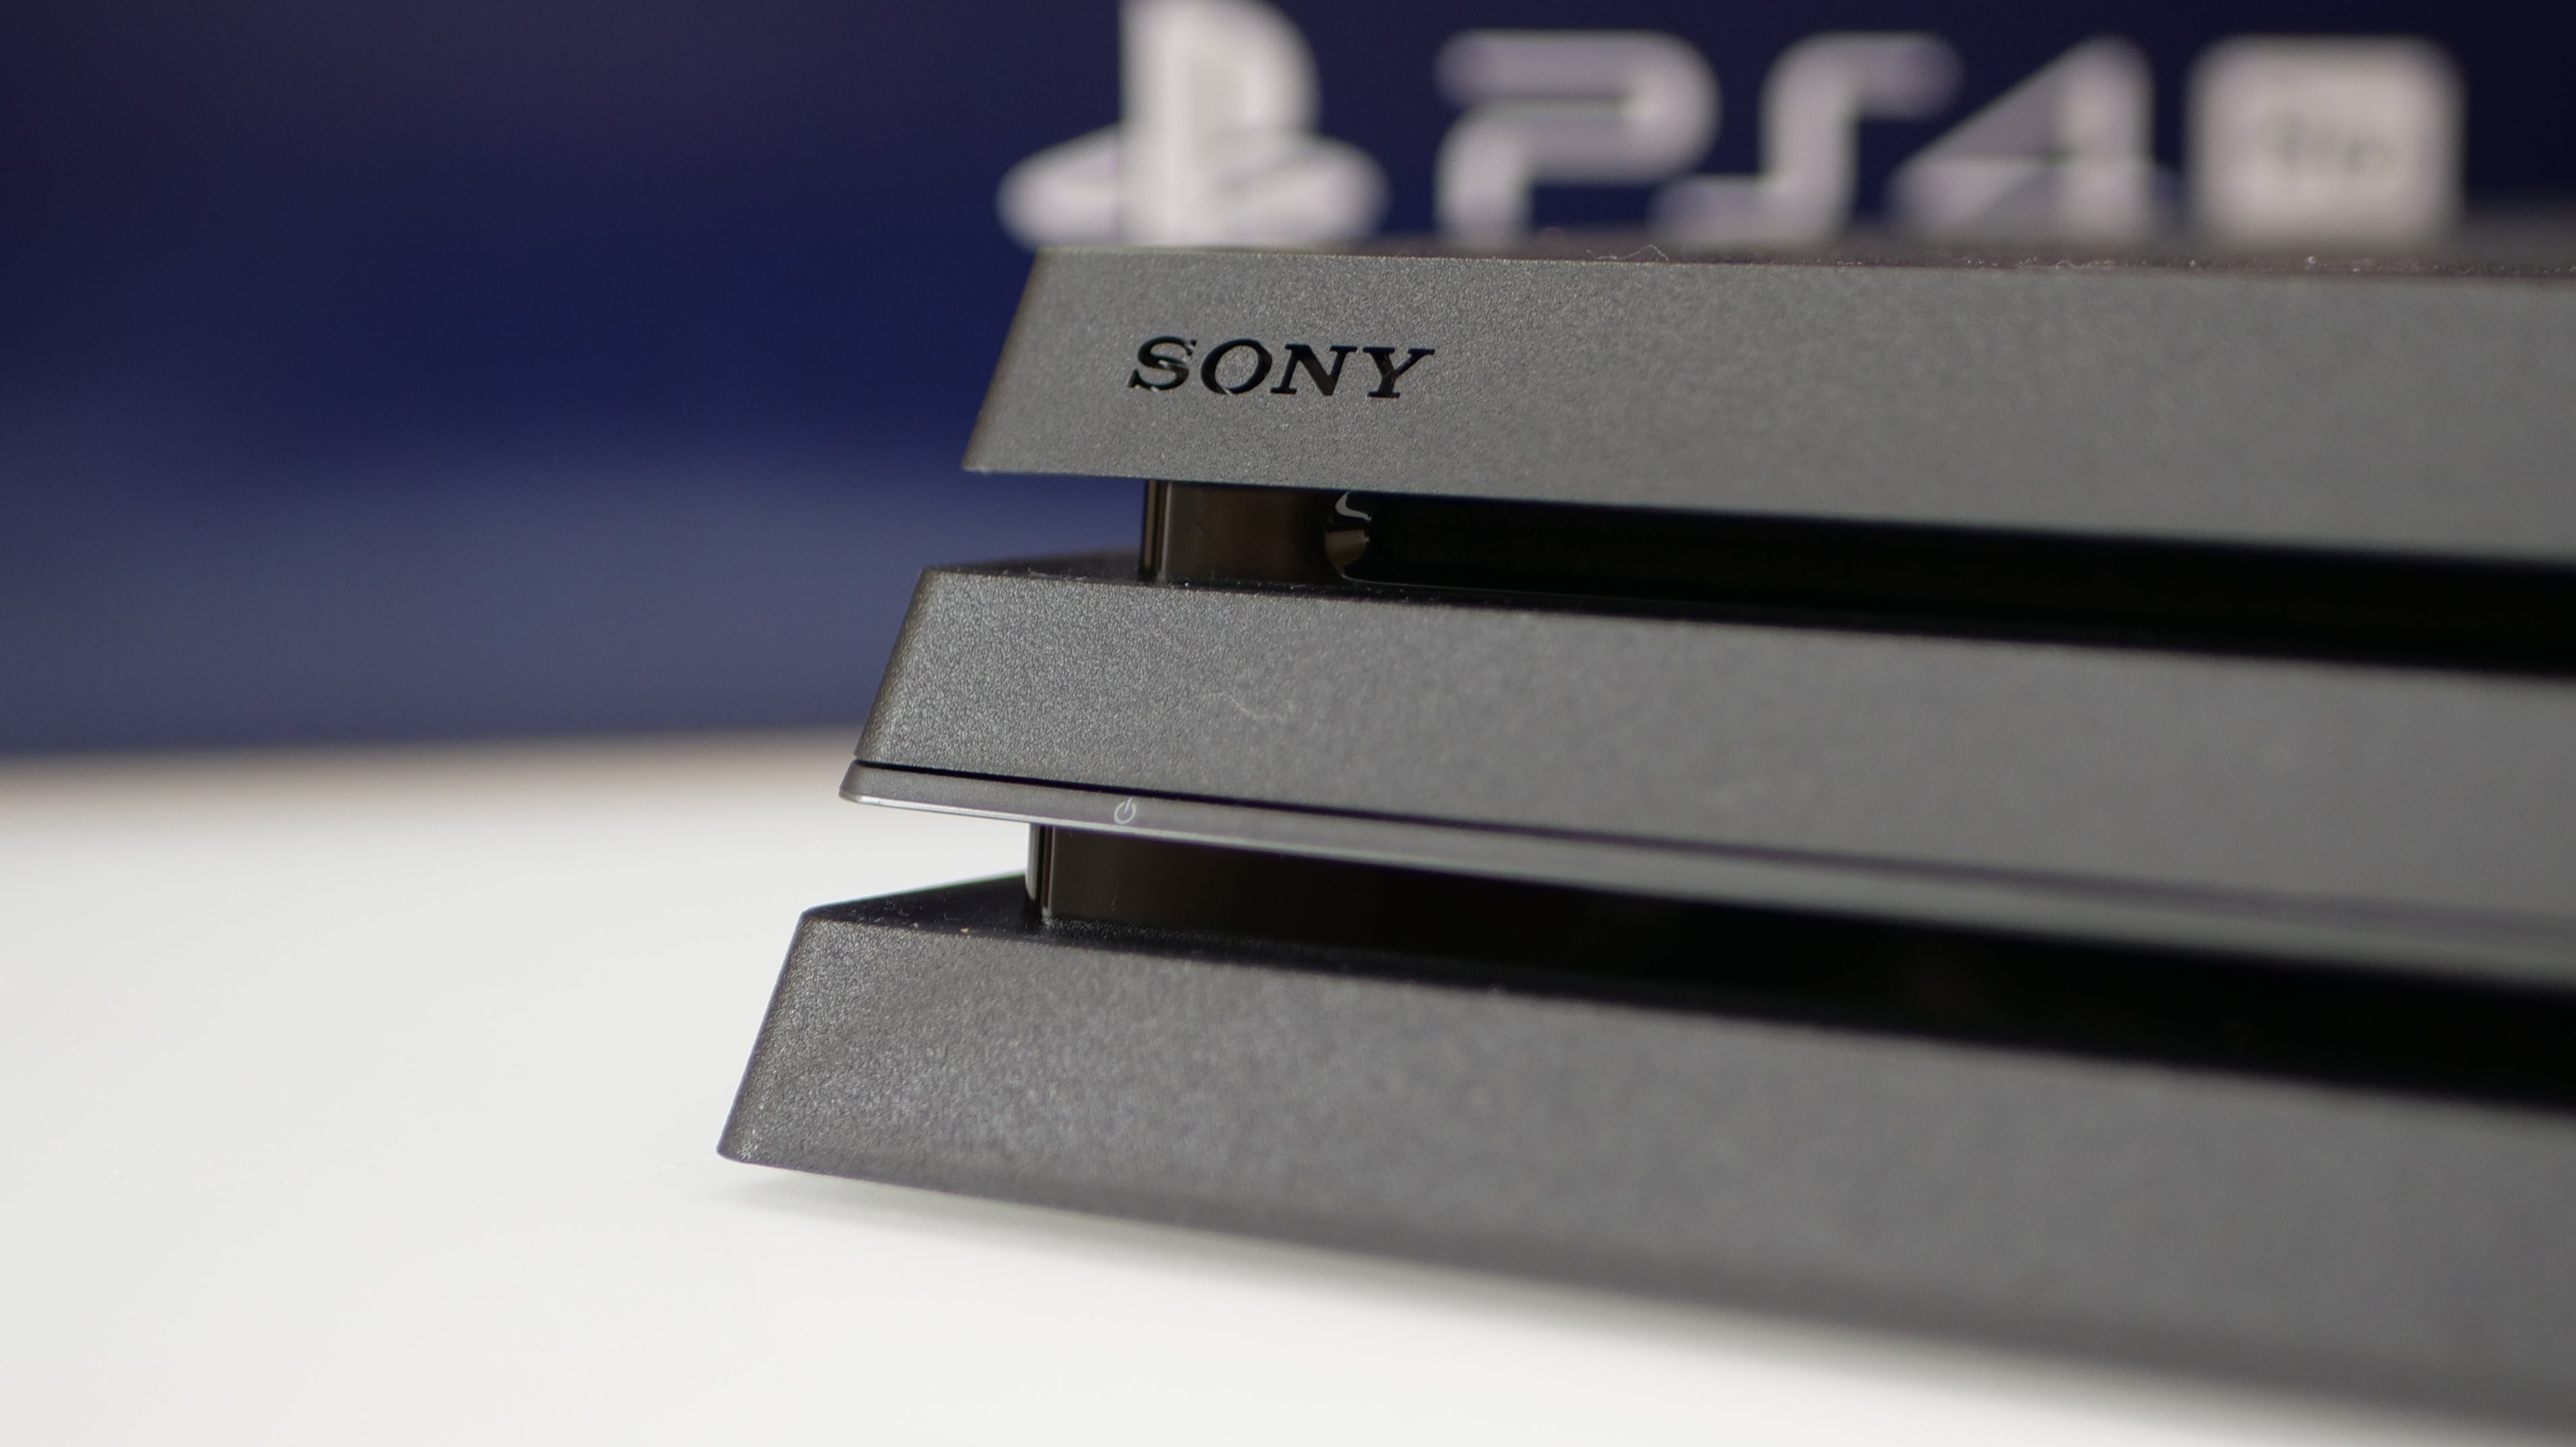 PlayStation 4 Pro CUH-7200 review: the latest, quietest hardware 